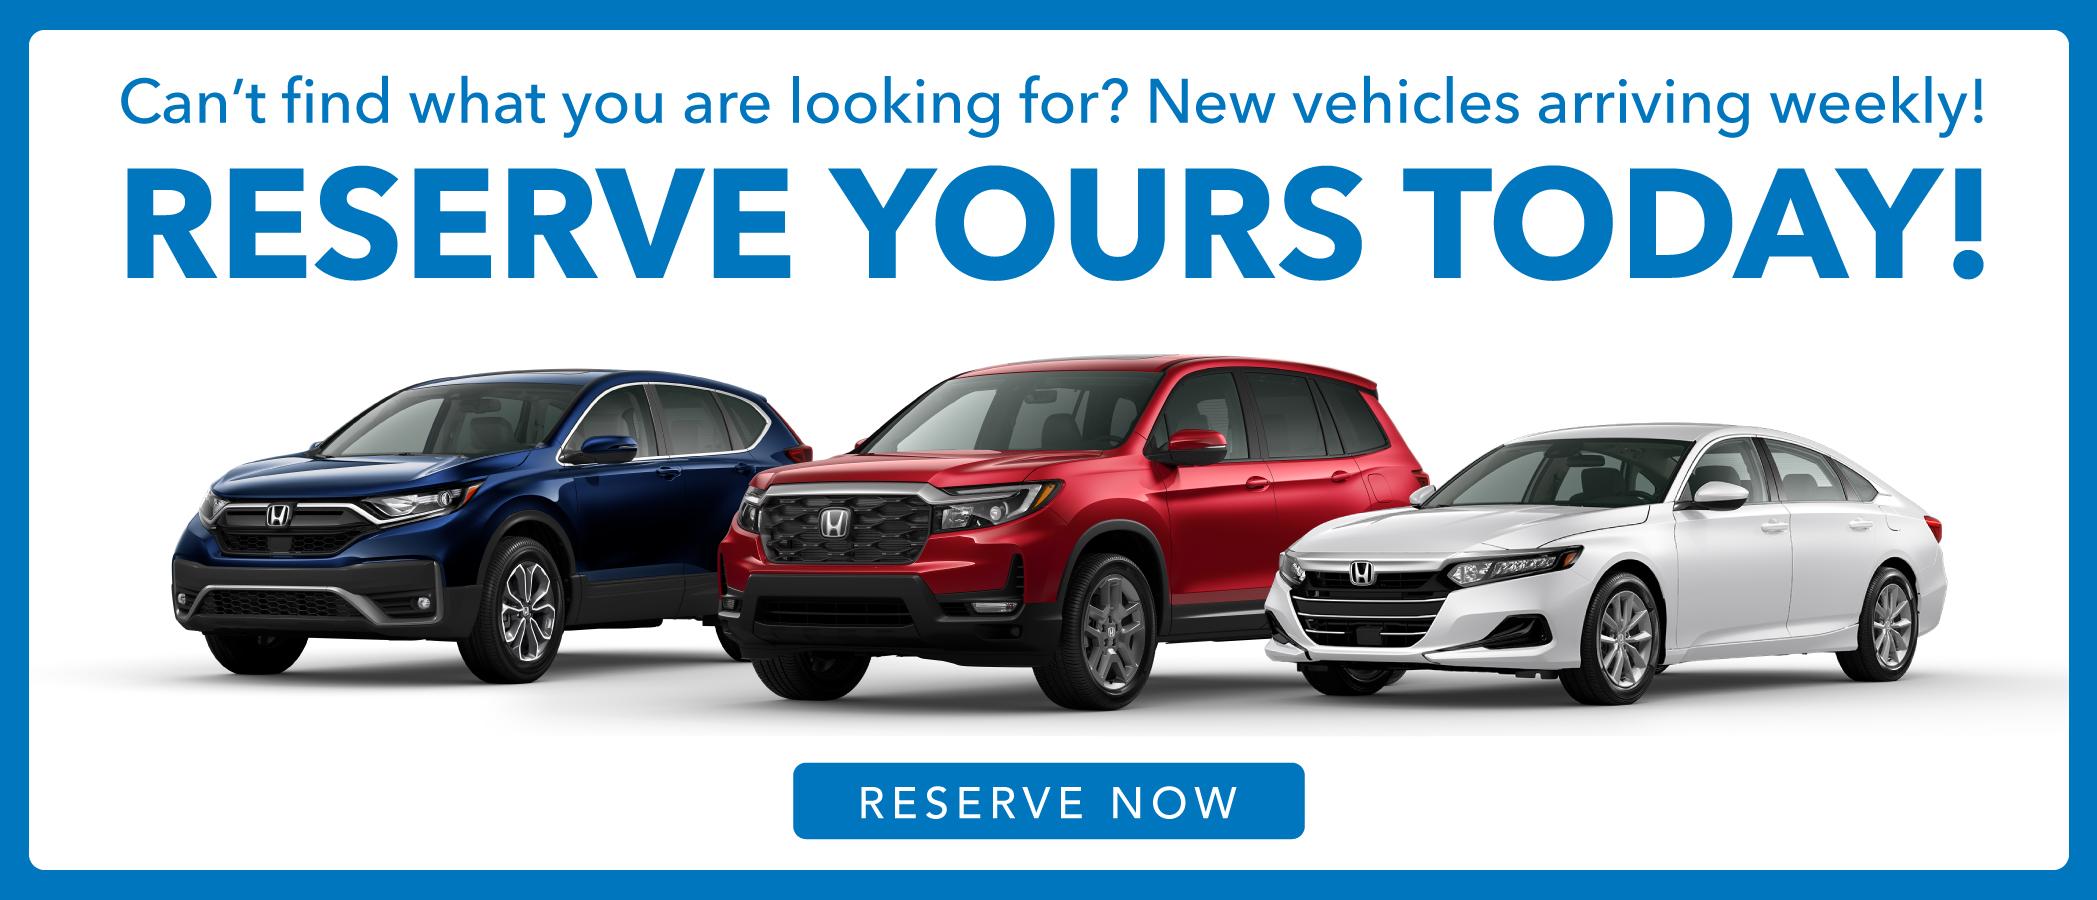 Reserve yours today Honda